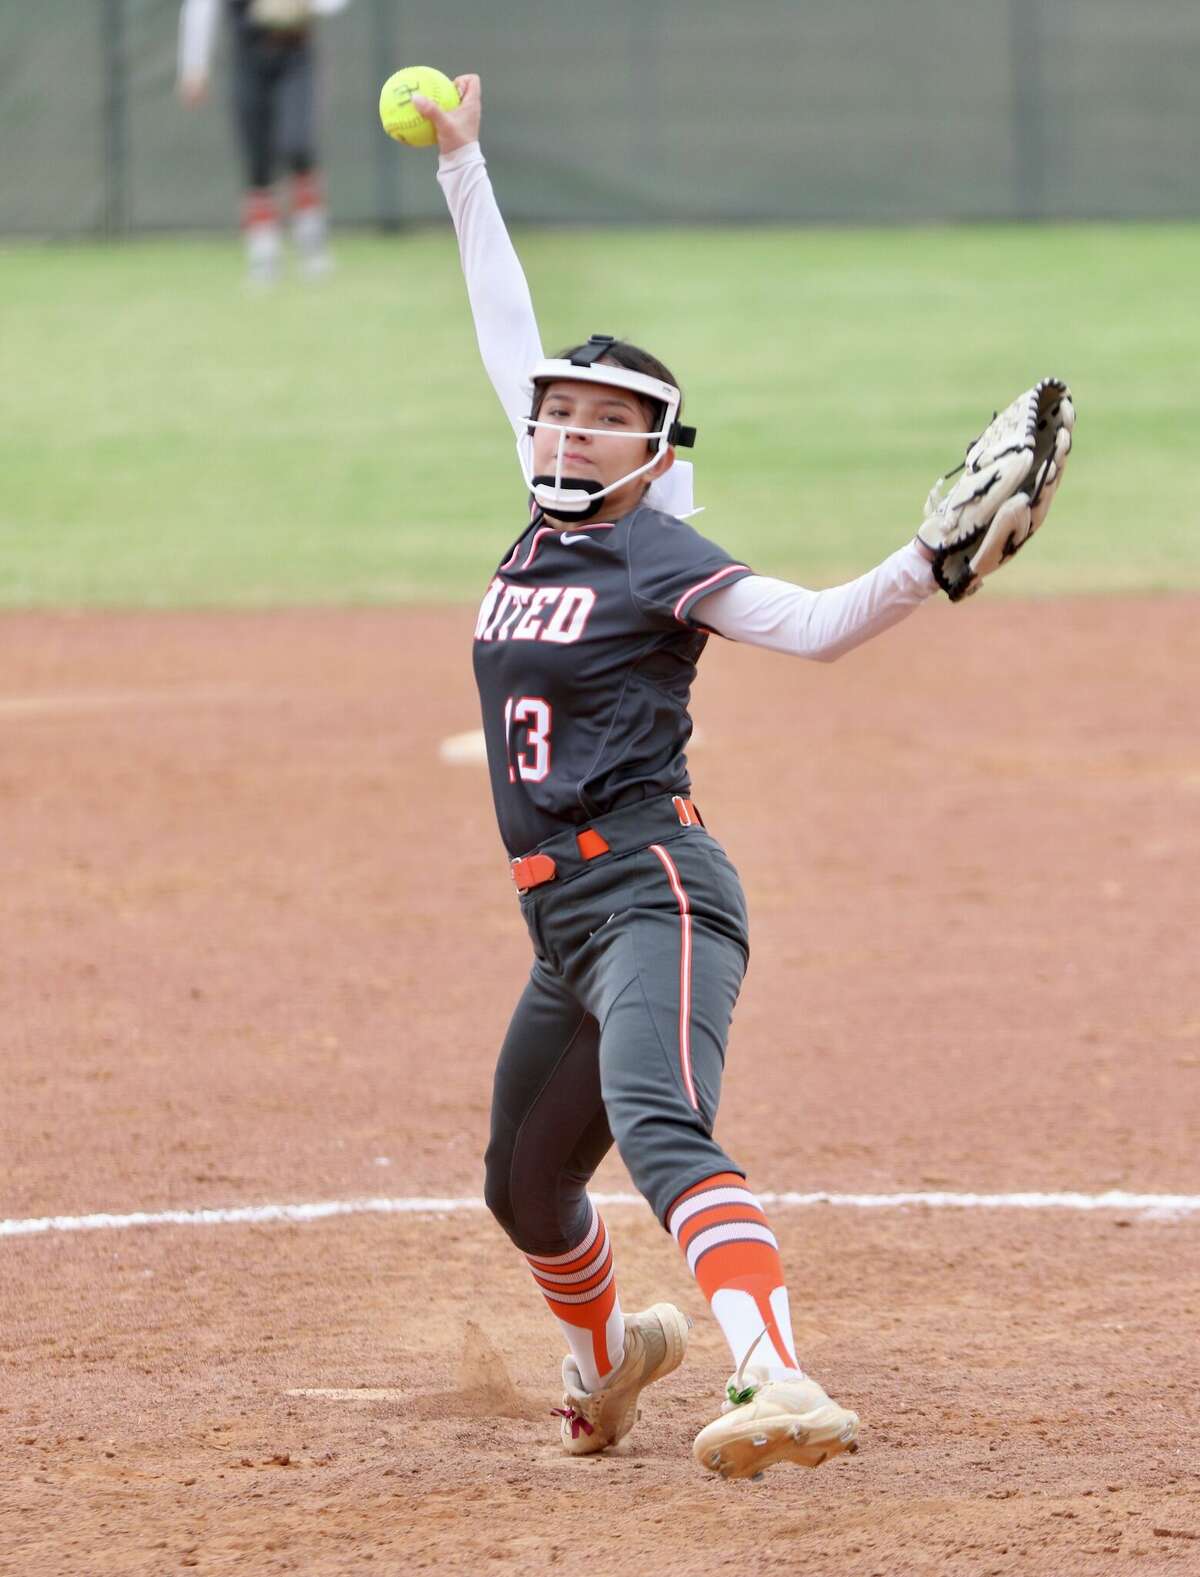 The United Lady Longhorns open district play against the United South Lady Panthers on Wednesday.